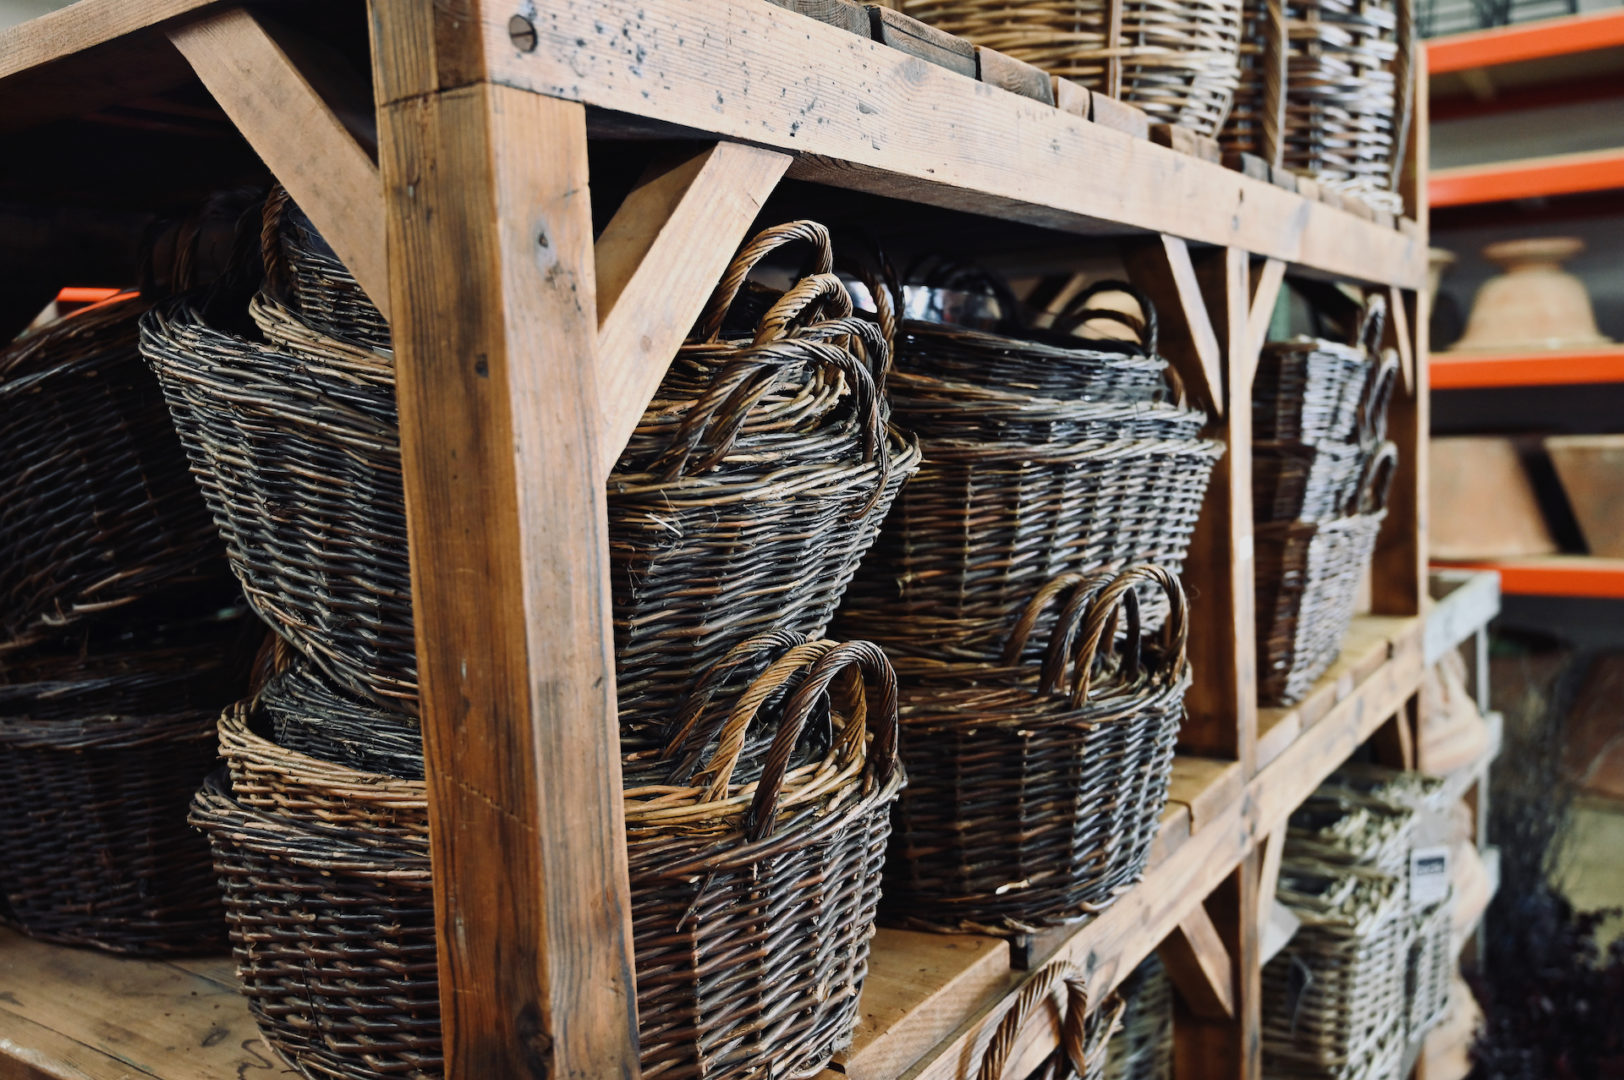 Nested Lined Baskets